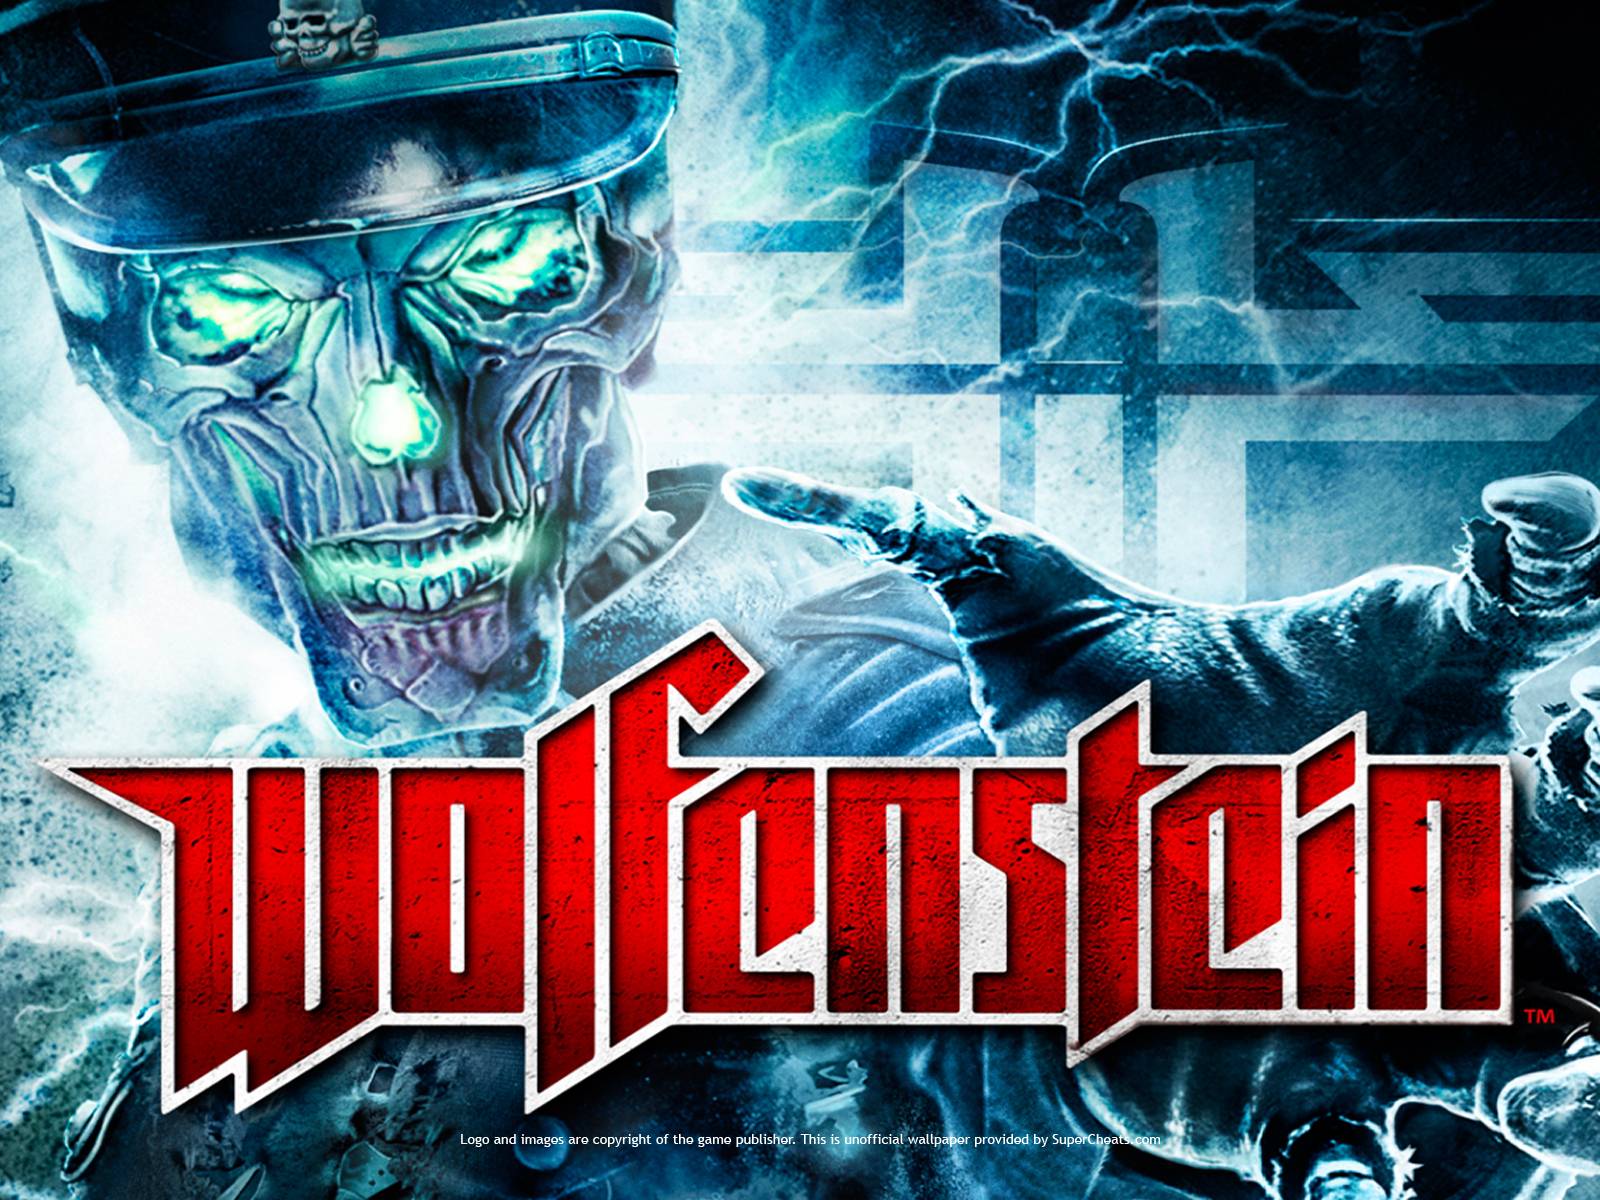 Wolfenstein (2009) Backgrounds, Compatible - PC, Mobile, Gadgets| 1600x1200 px